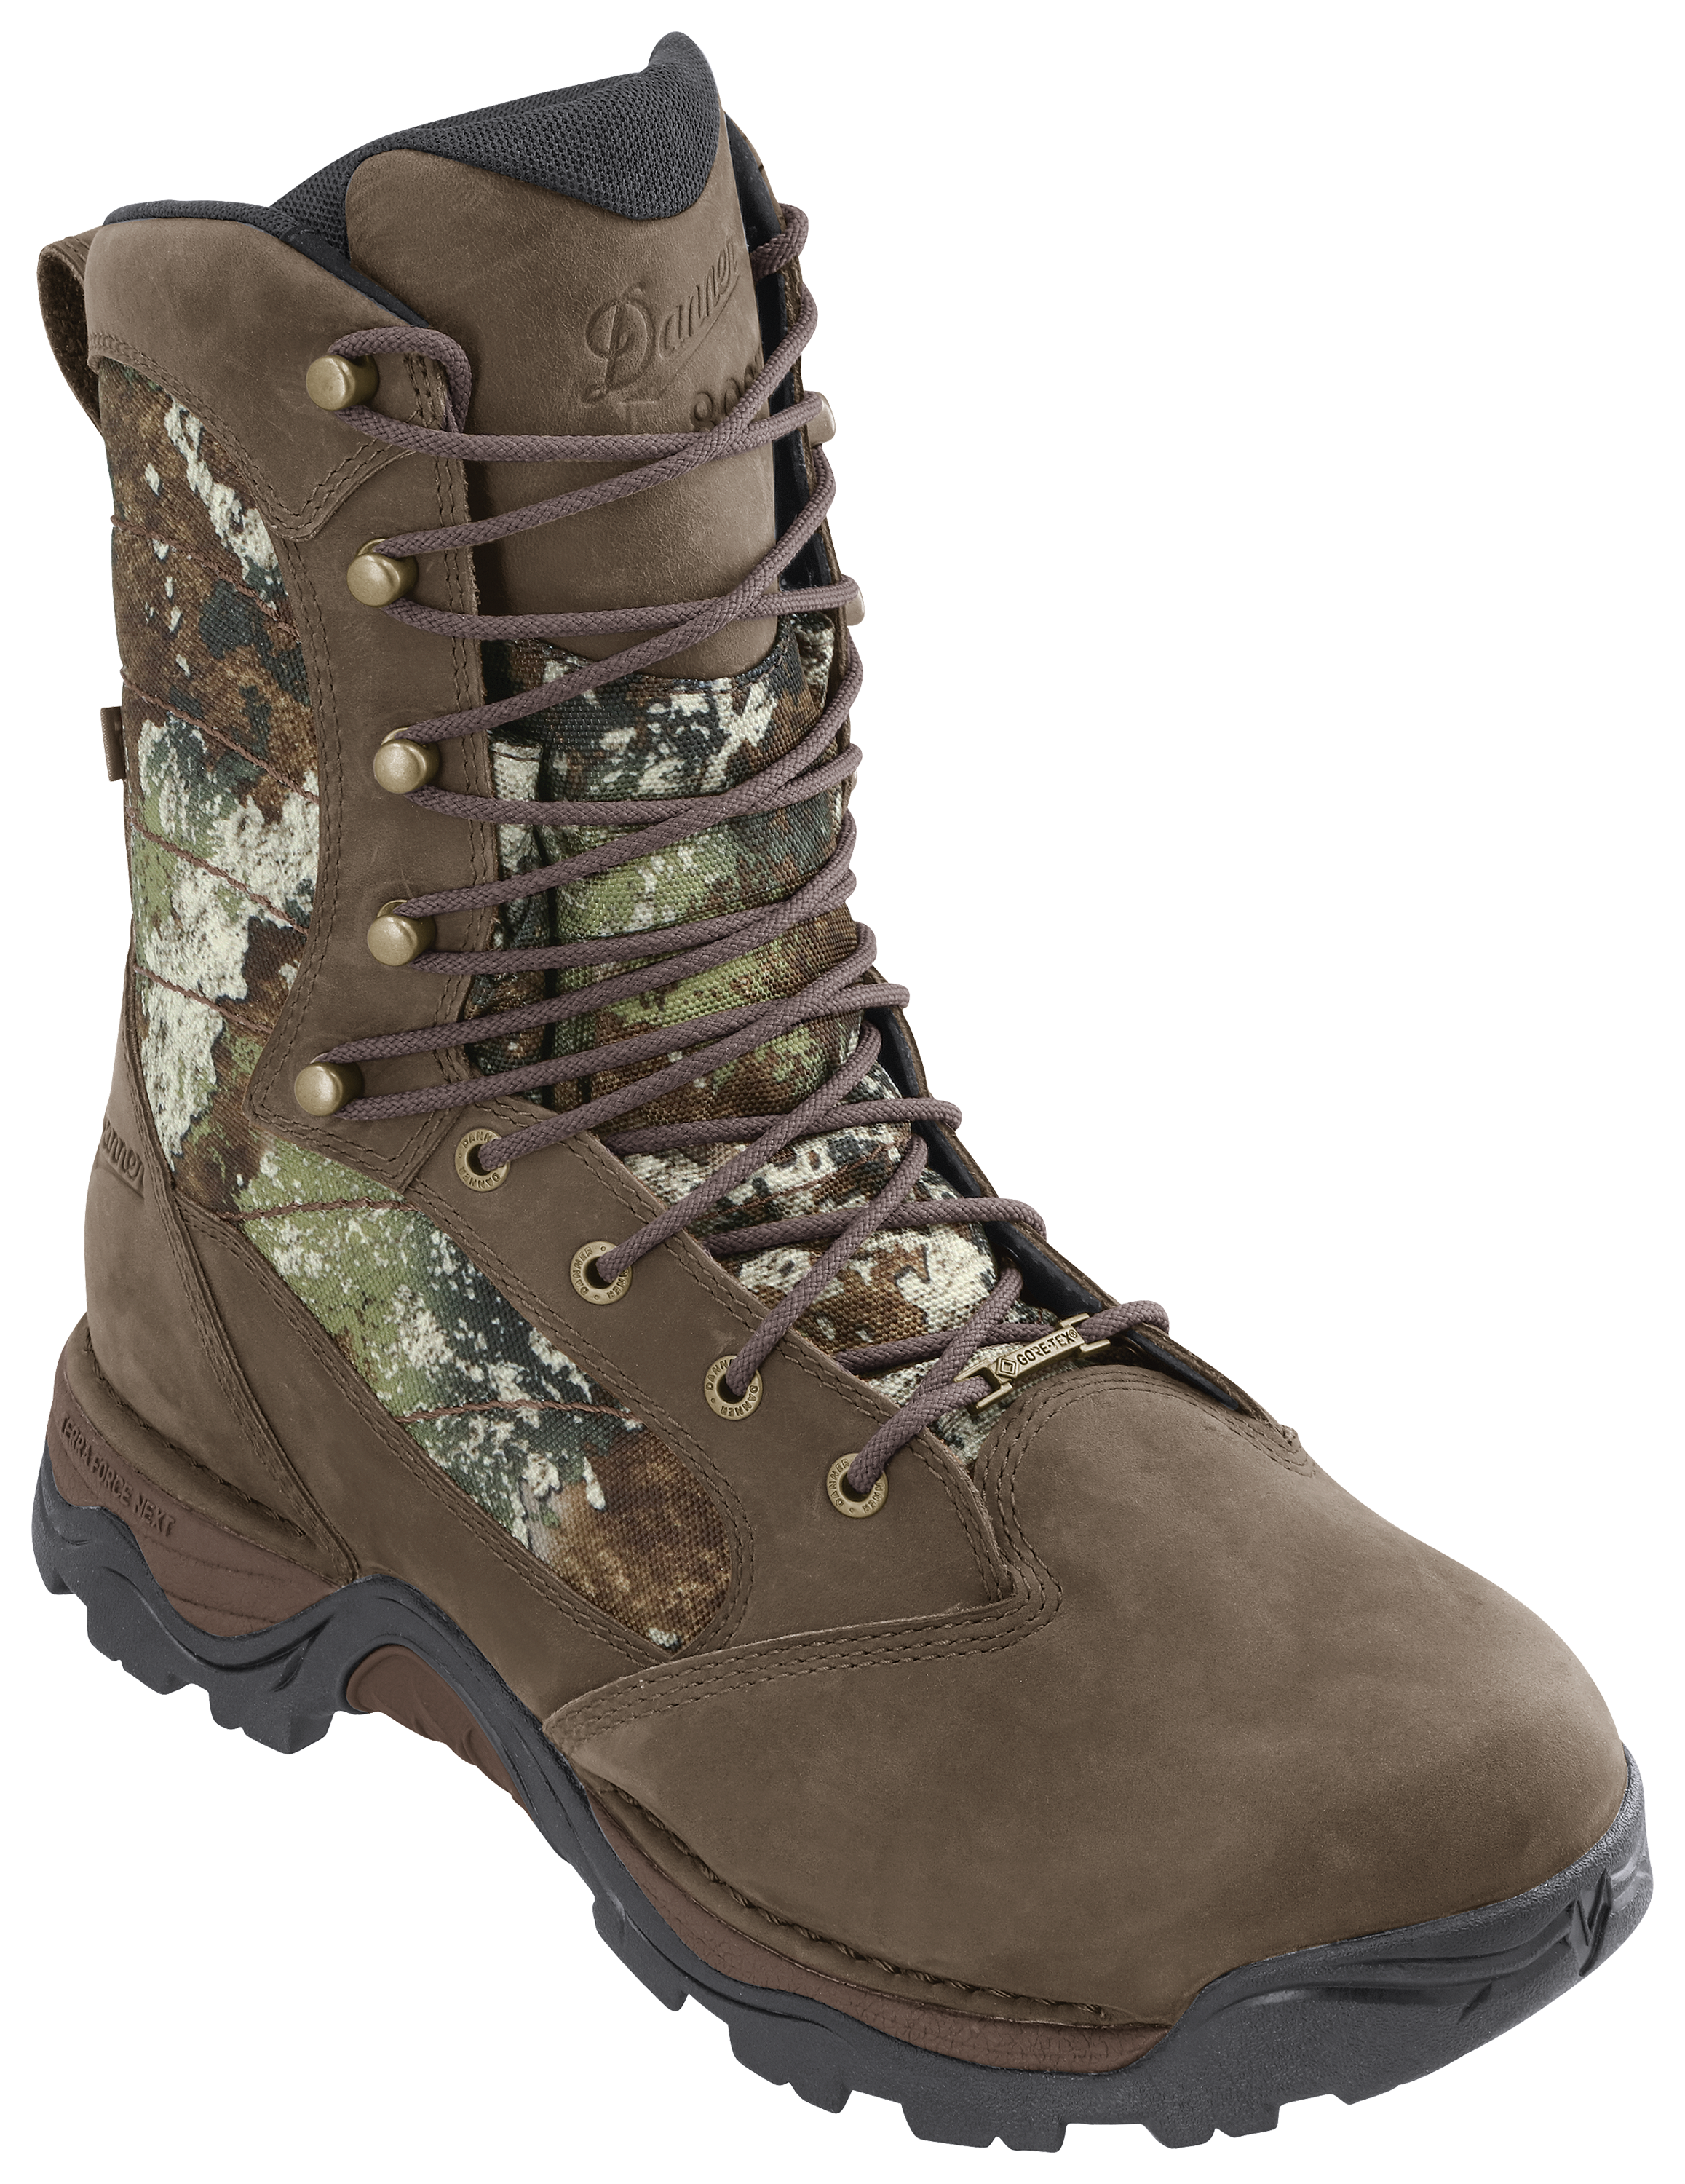 Danner Pronghorn 800 TrueTimber Strata Insulated GORE-TEX Hunting Boots ...